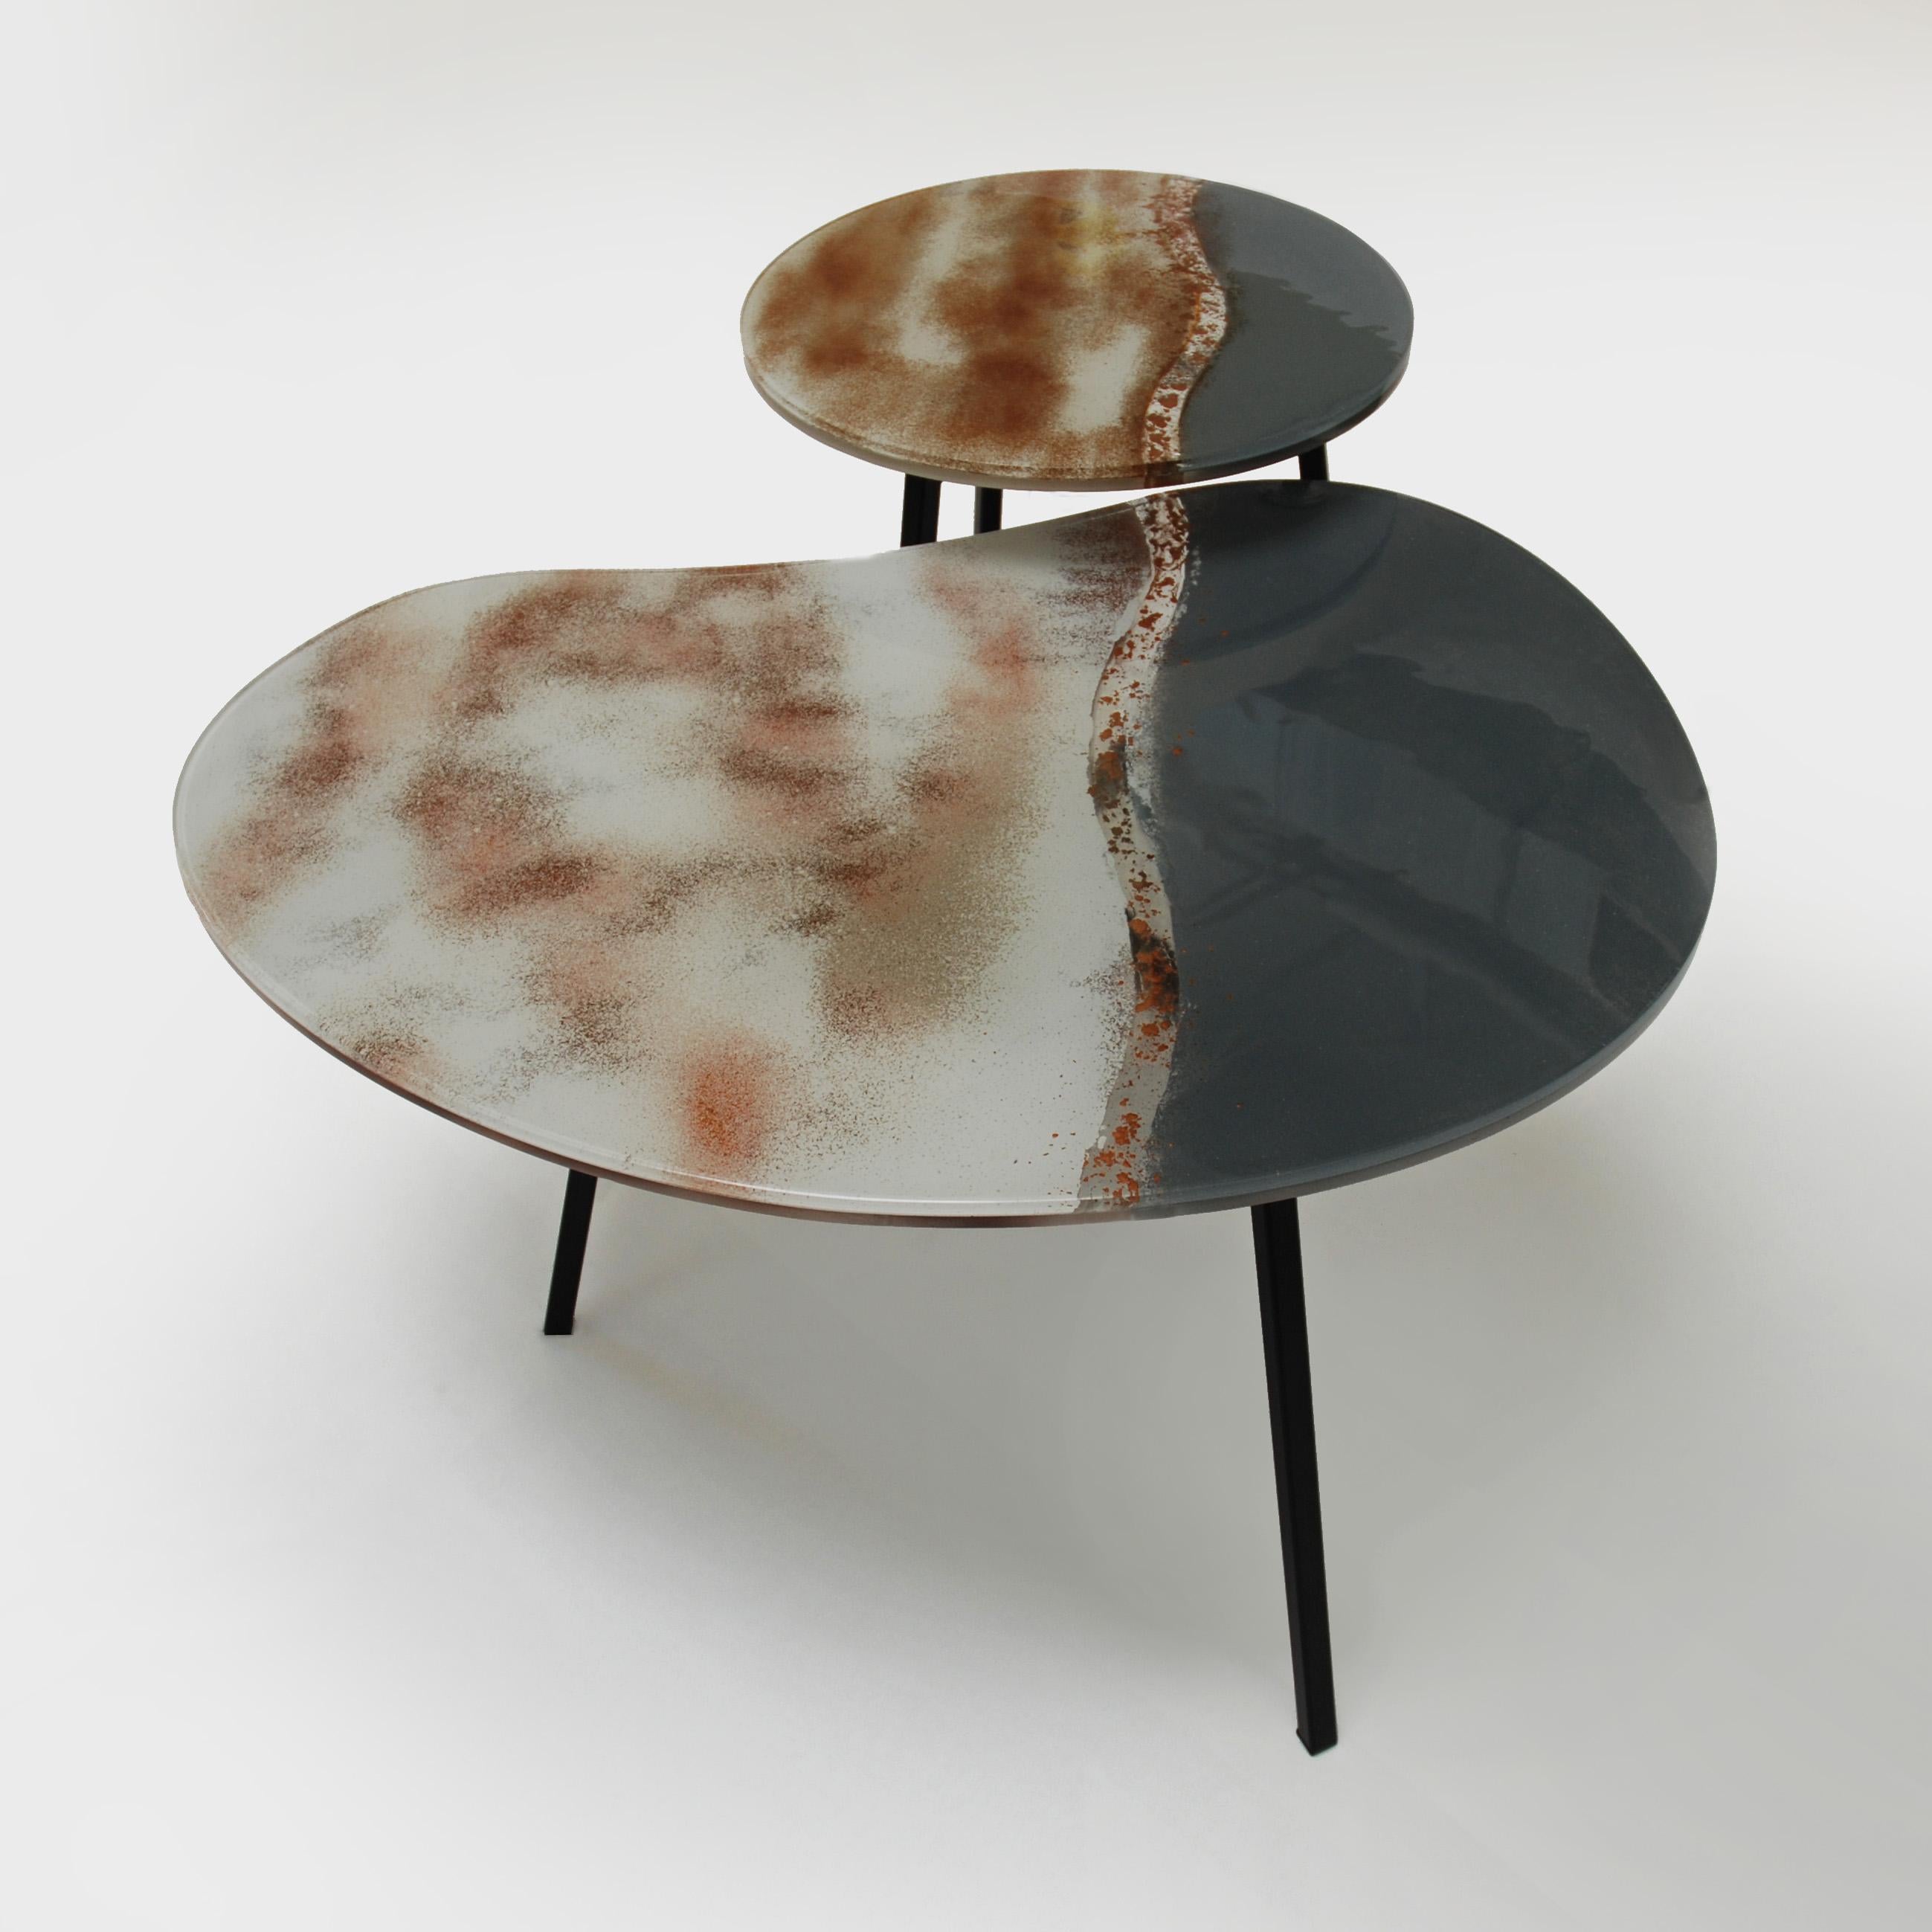 Contemporary and modern round coffee tables desert sand with Murano kind handmade glass colored using metal oxides in white, brown, grey and liquid metal in gold color. Limited collection signed by Edith Baranska showed for the first time in Milan